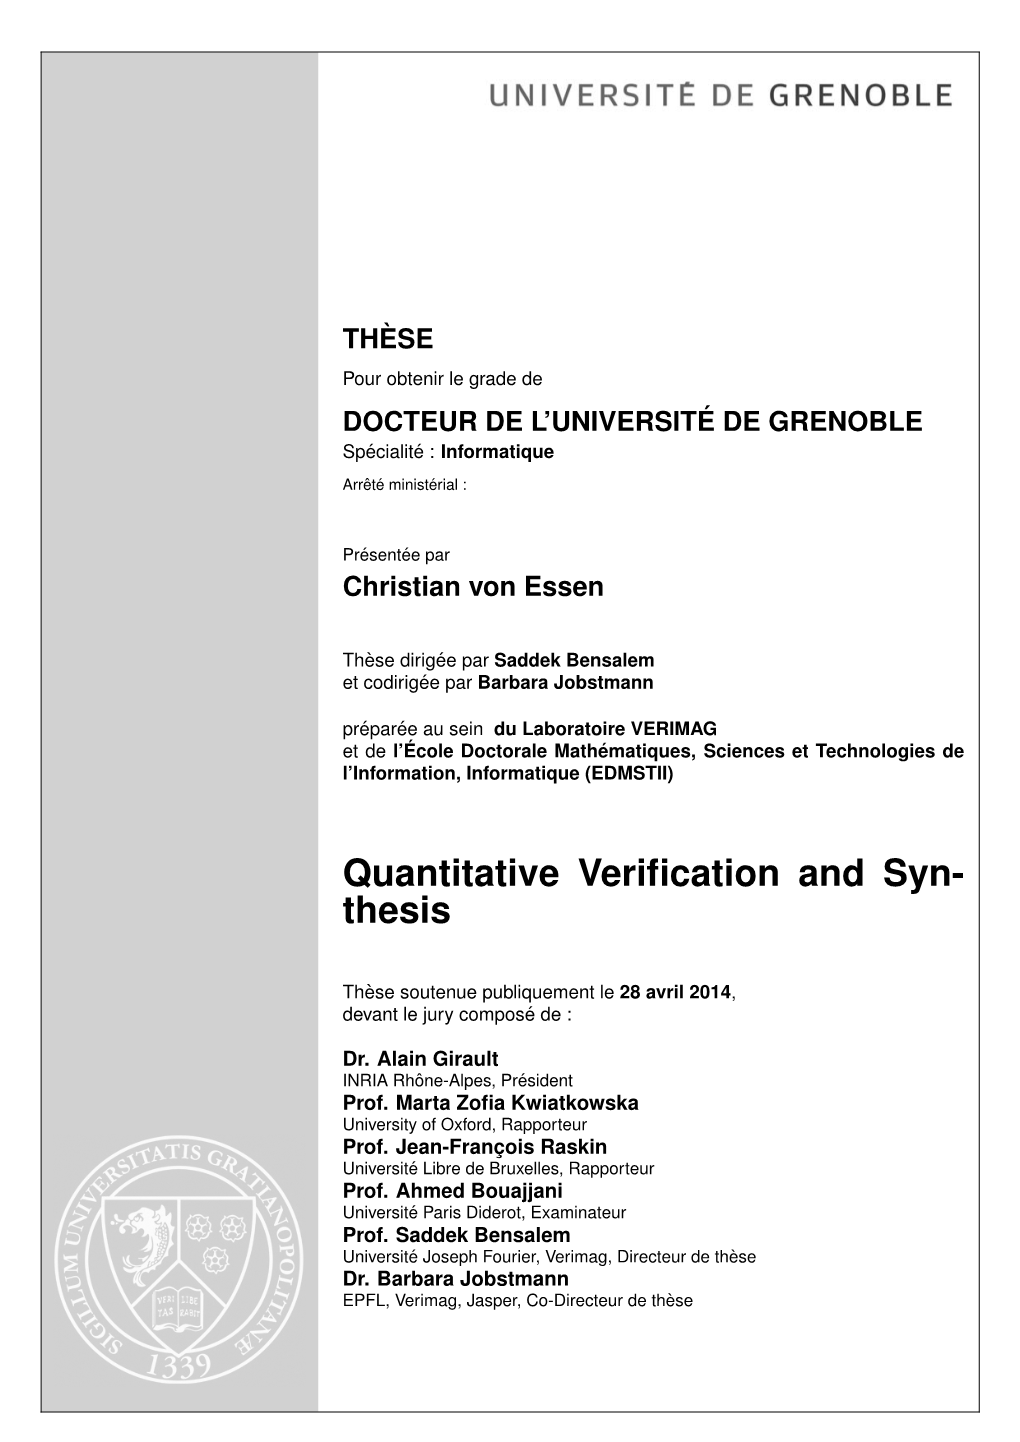 Quantitative Verification and Syn- Thesis